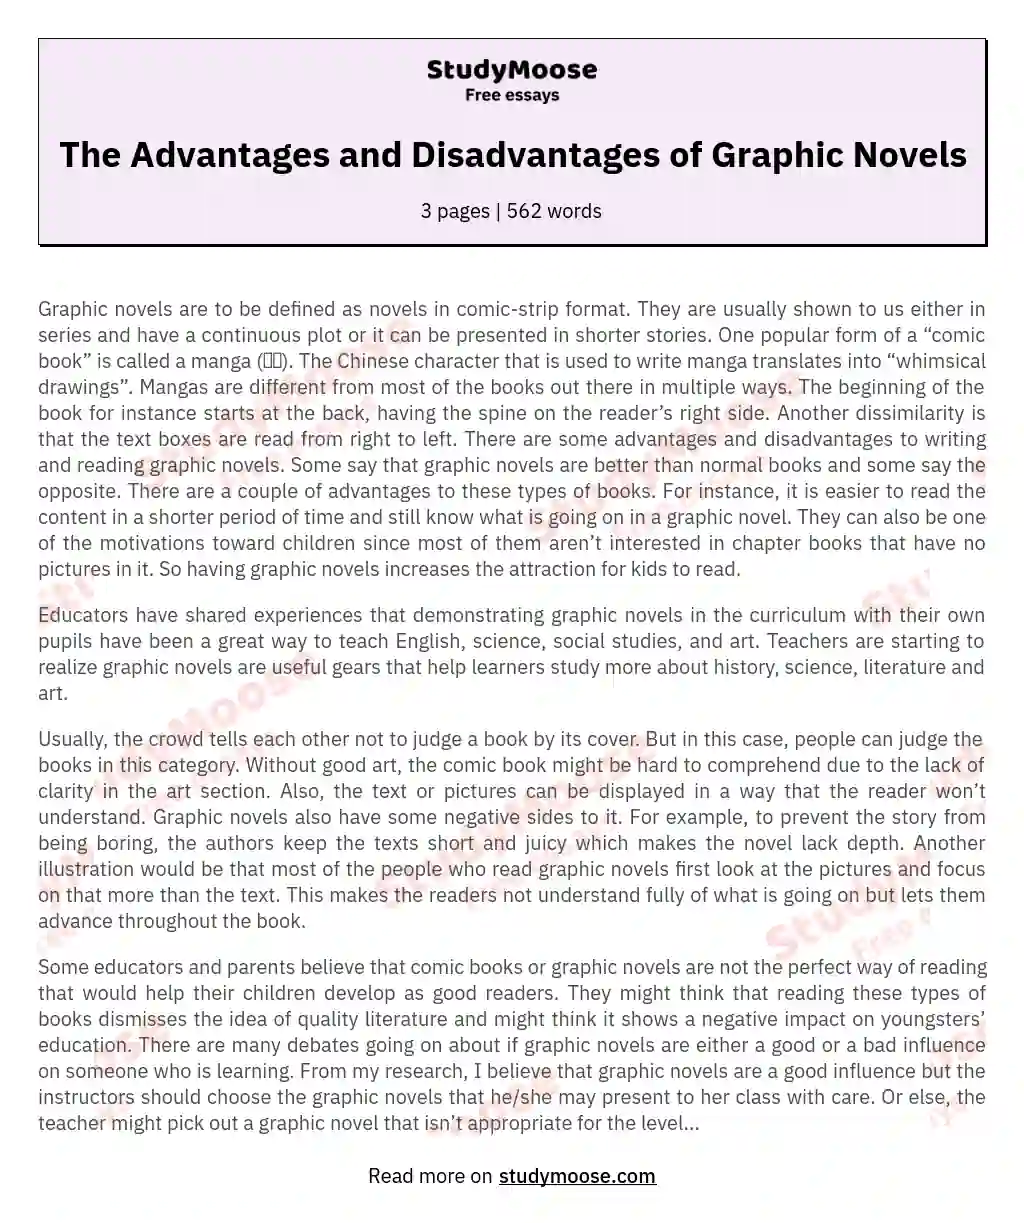 The Advantages and Disadvantages of Graphic Novels essay